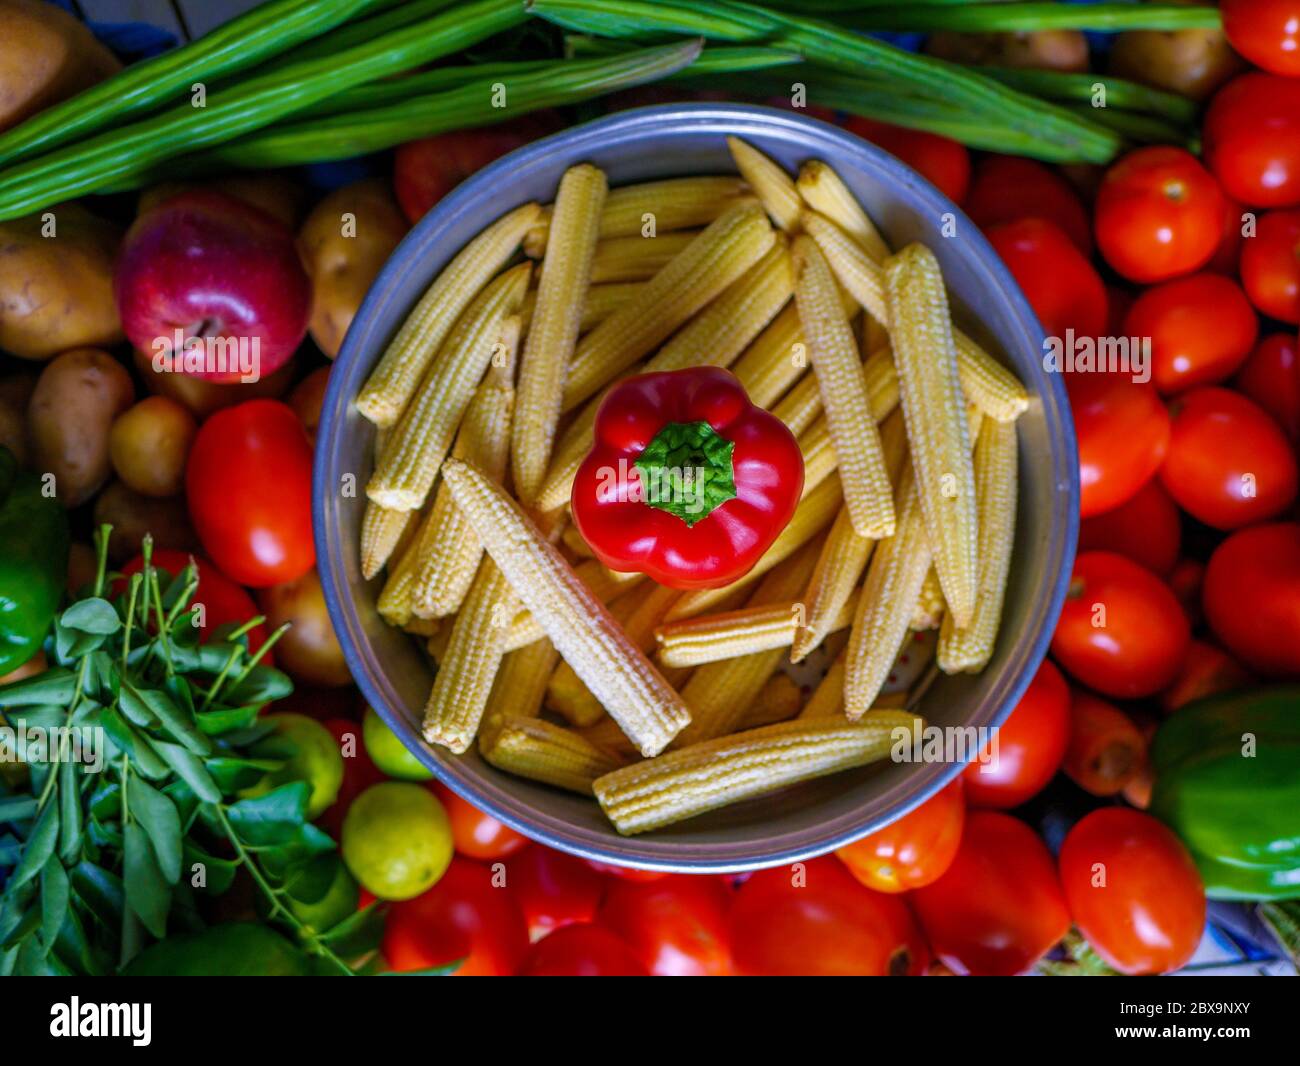 Red Capsicum and Baby corns arranged in a basket with tomatoes and green veggies in background Stock Photo